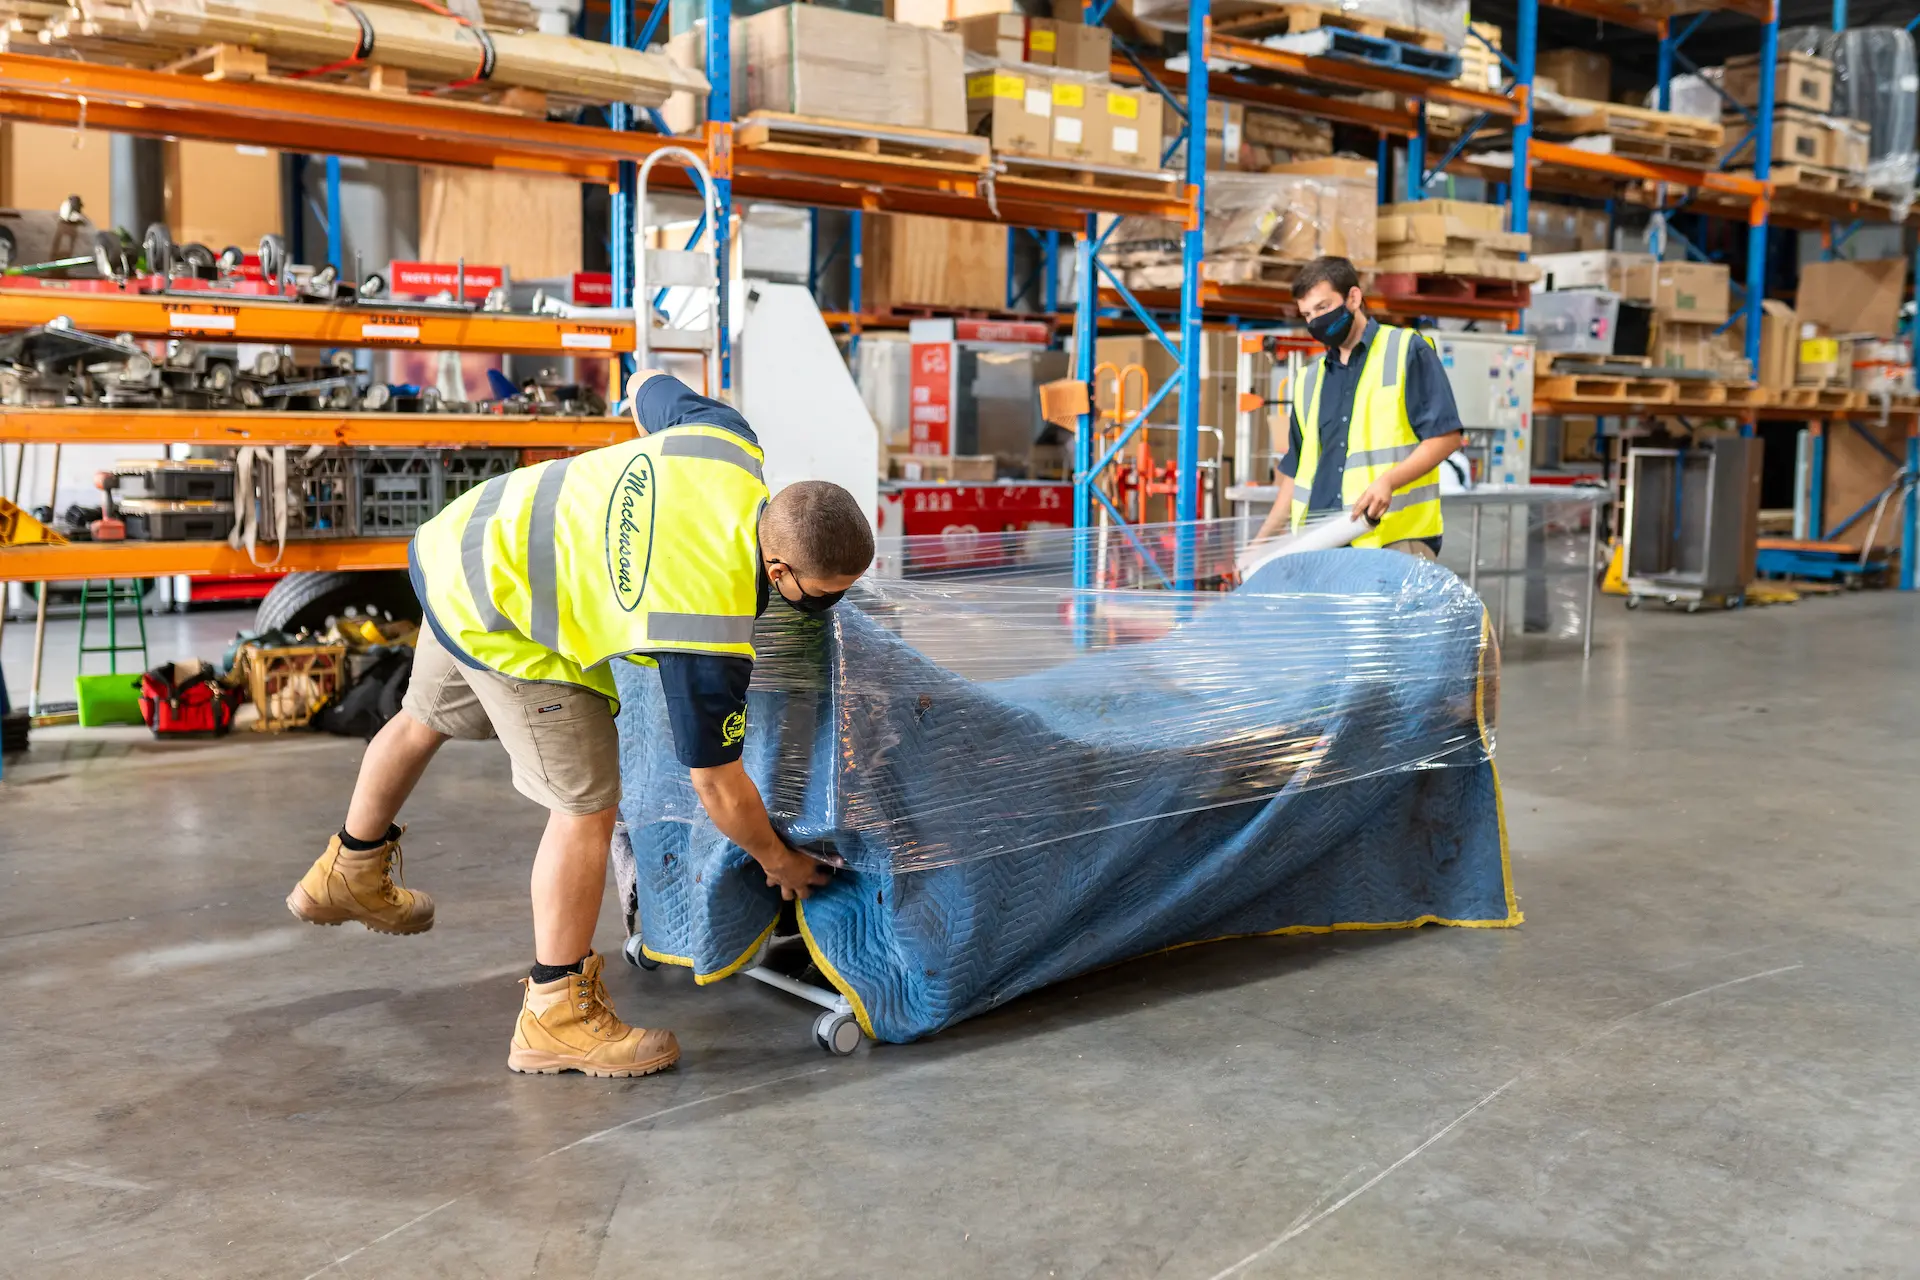 Wrapping freight in protective plastic